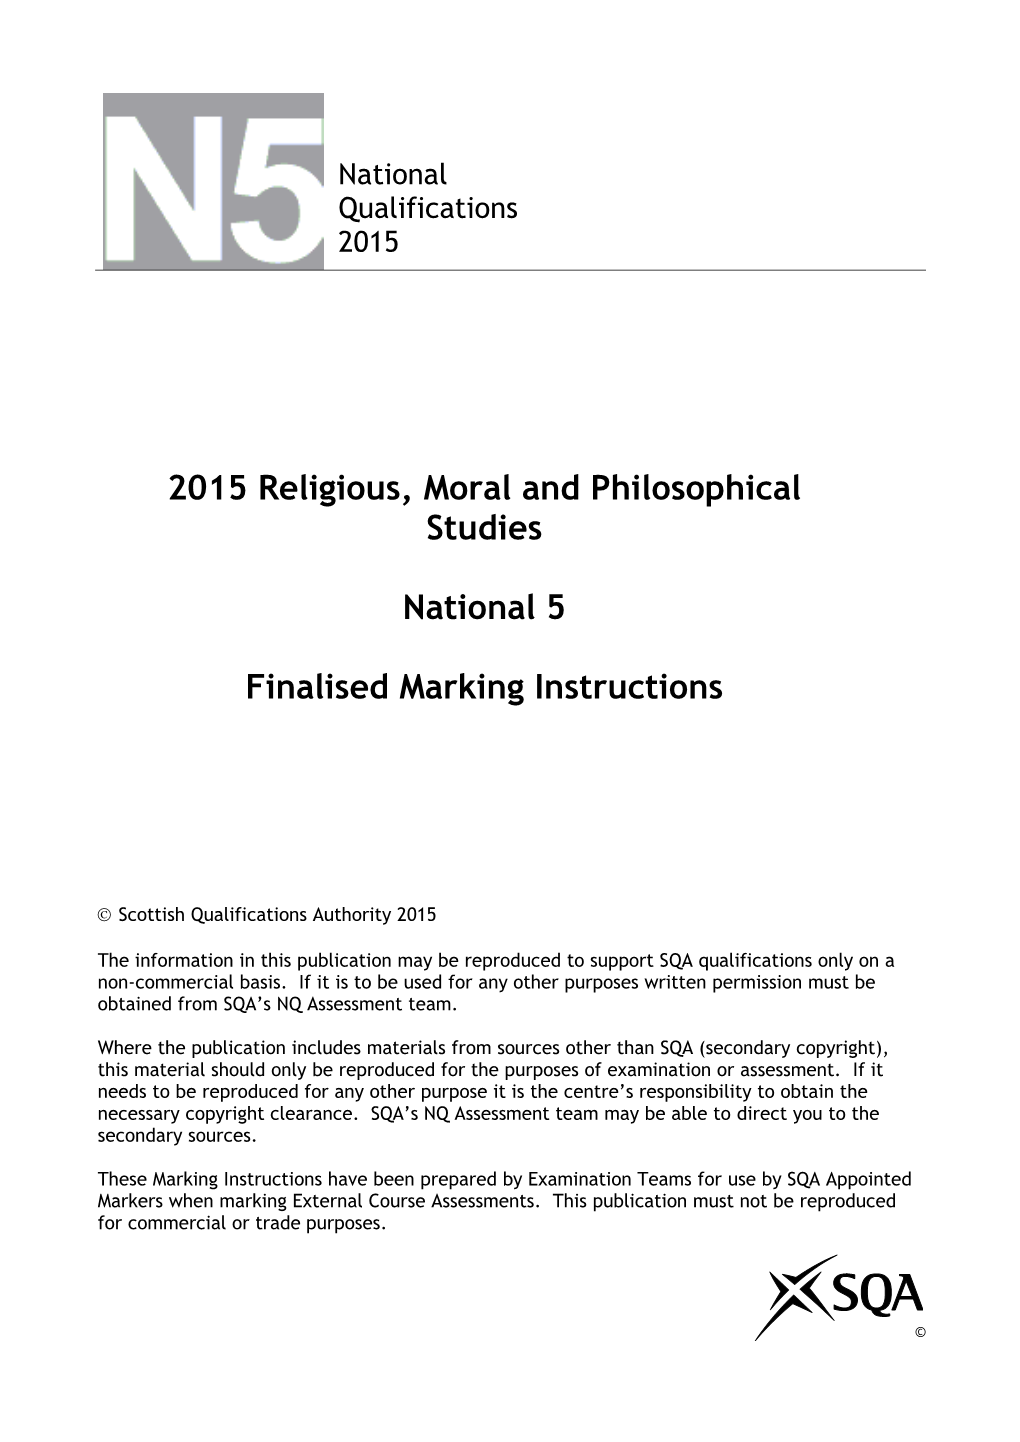 2015 Religious, Moral and Philosophical Studies National 5 Finalised Marking Instructions